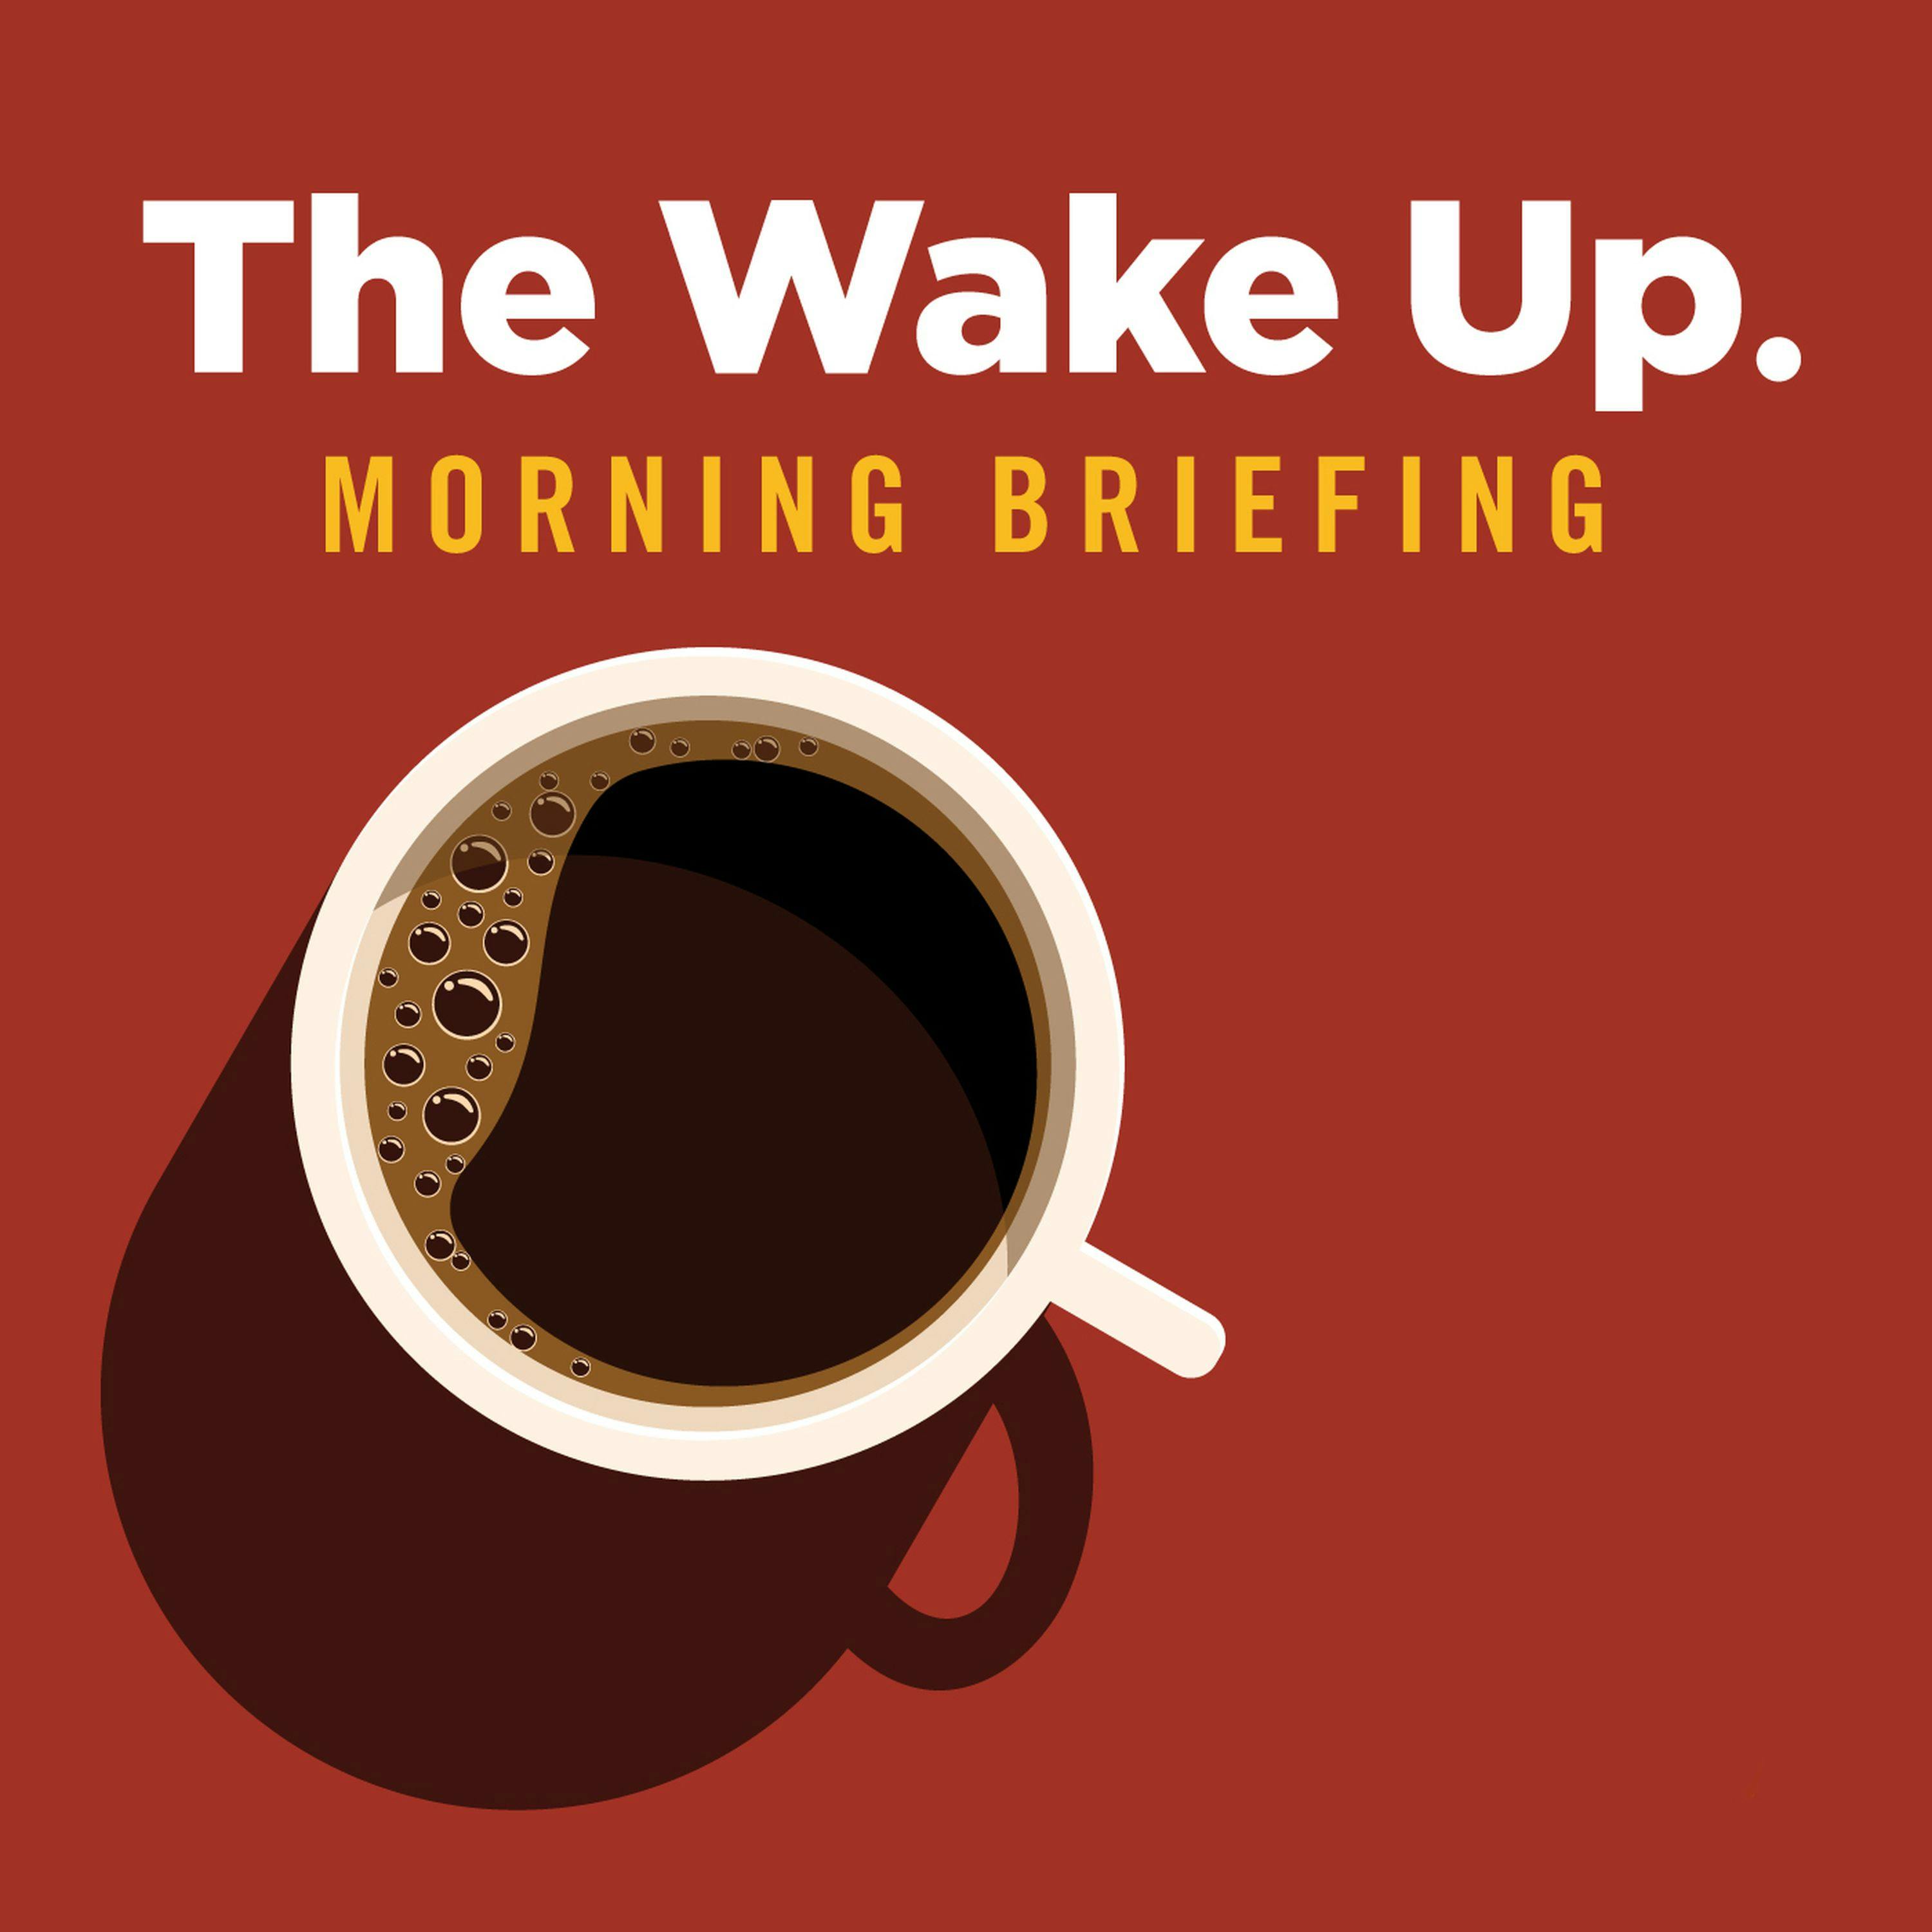 The Wake Up - July 3, 2020 - Ohio Gov. Mike DeWine fulfills his promise to surprise no one with his school reopening plan